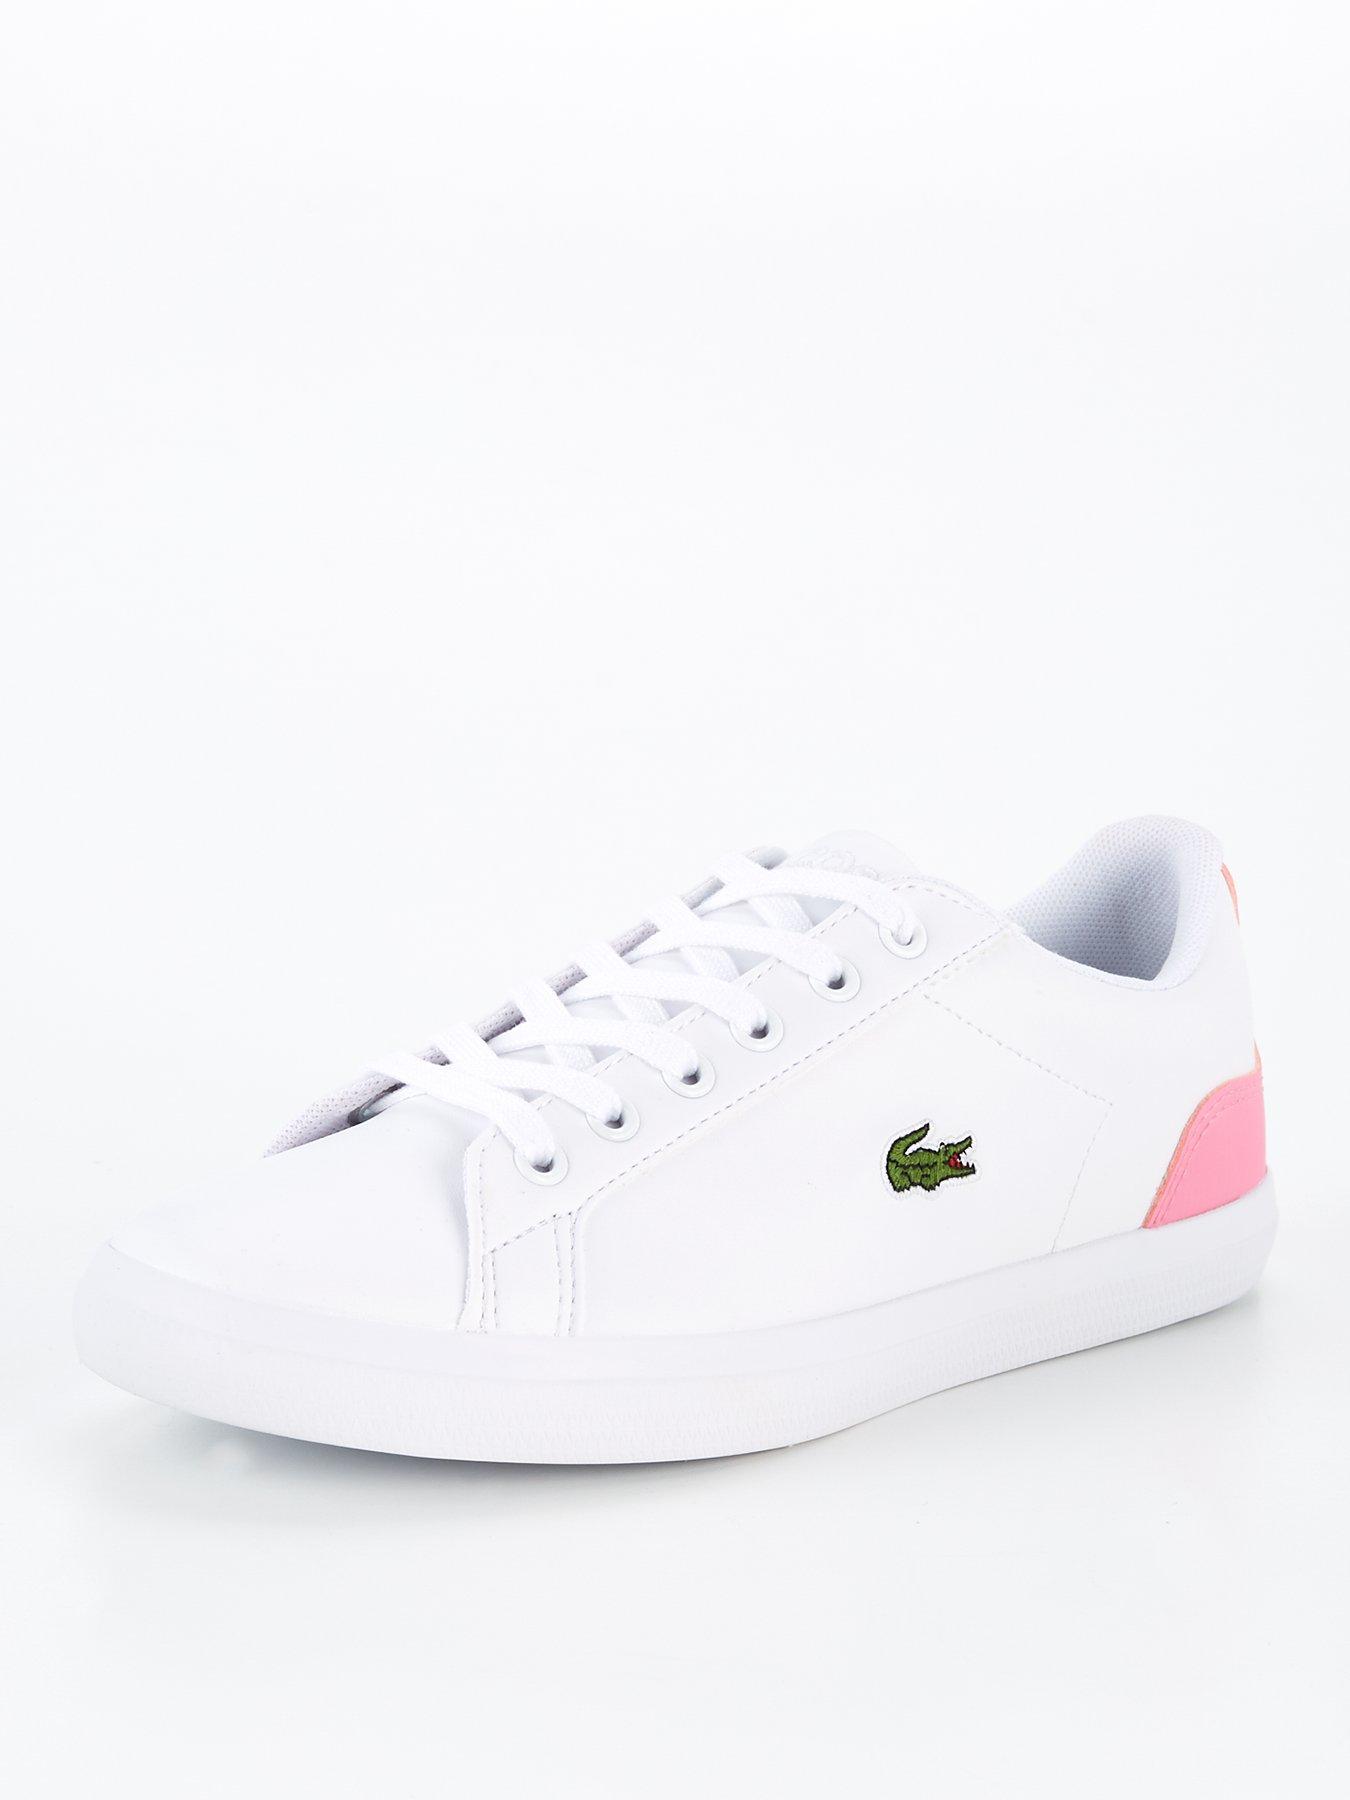 pink and white lacoste trainers